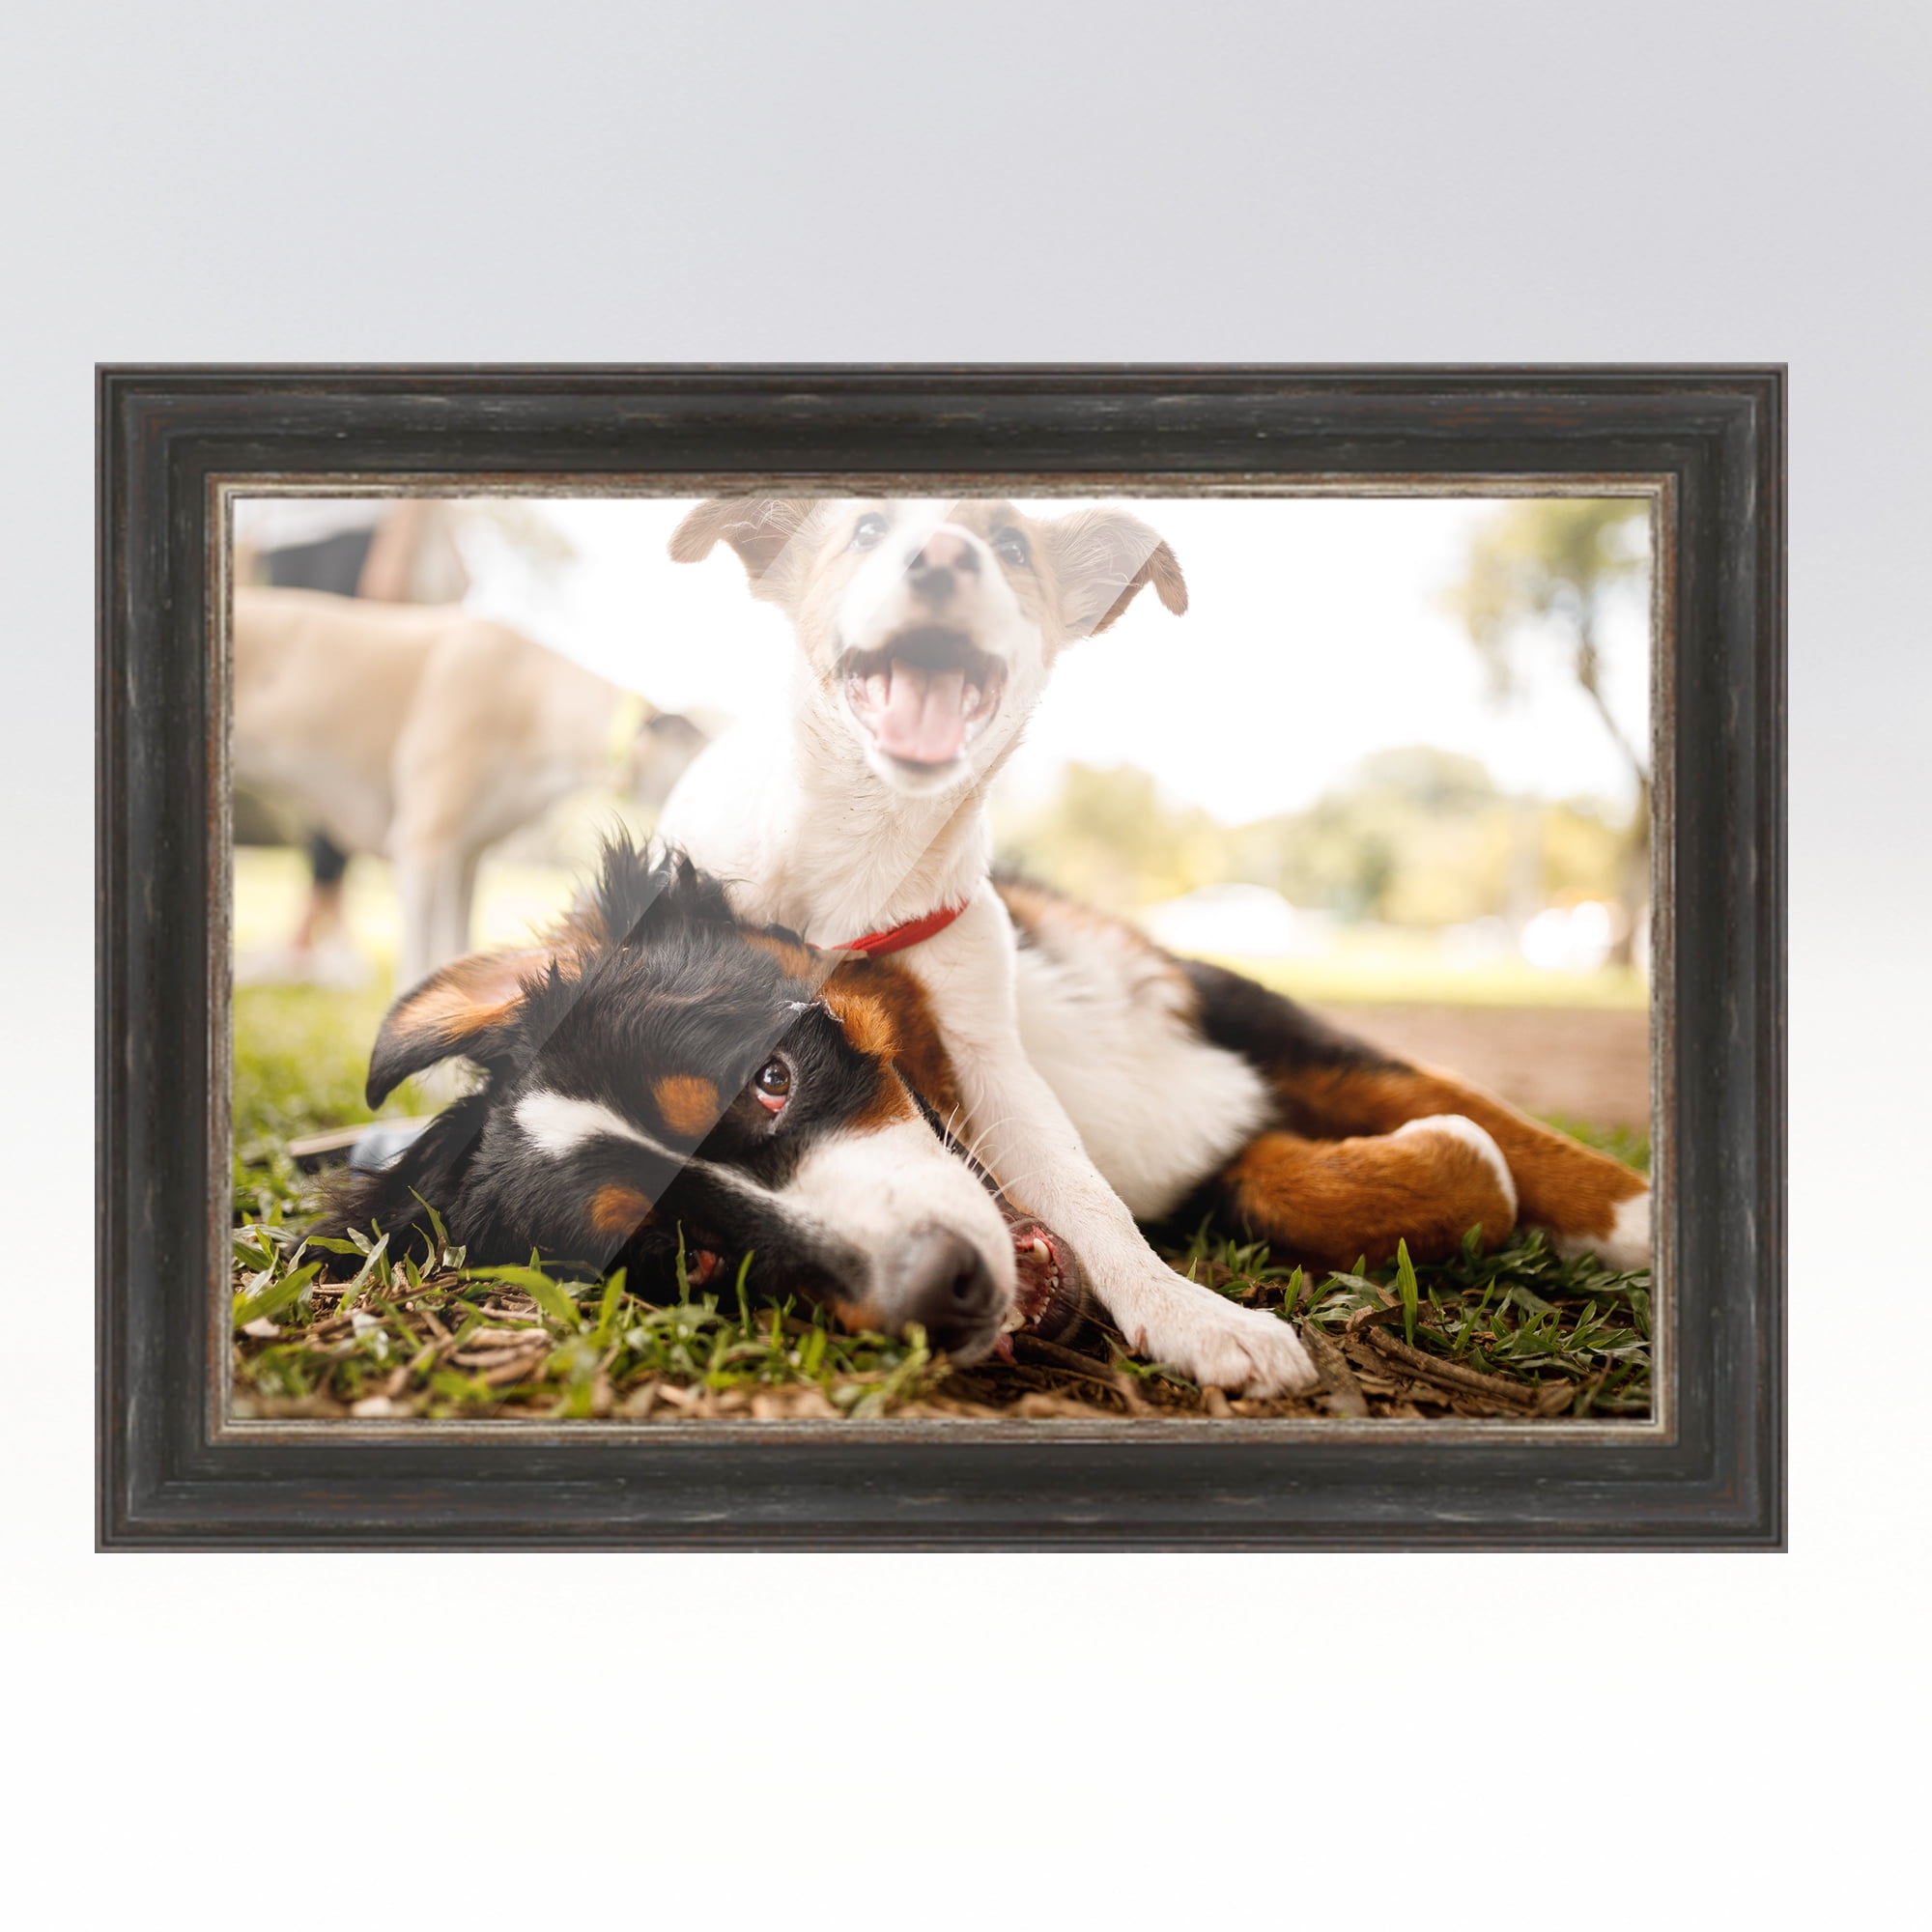  16x24 Picture Frame, Black Poster Frame, Bamboo